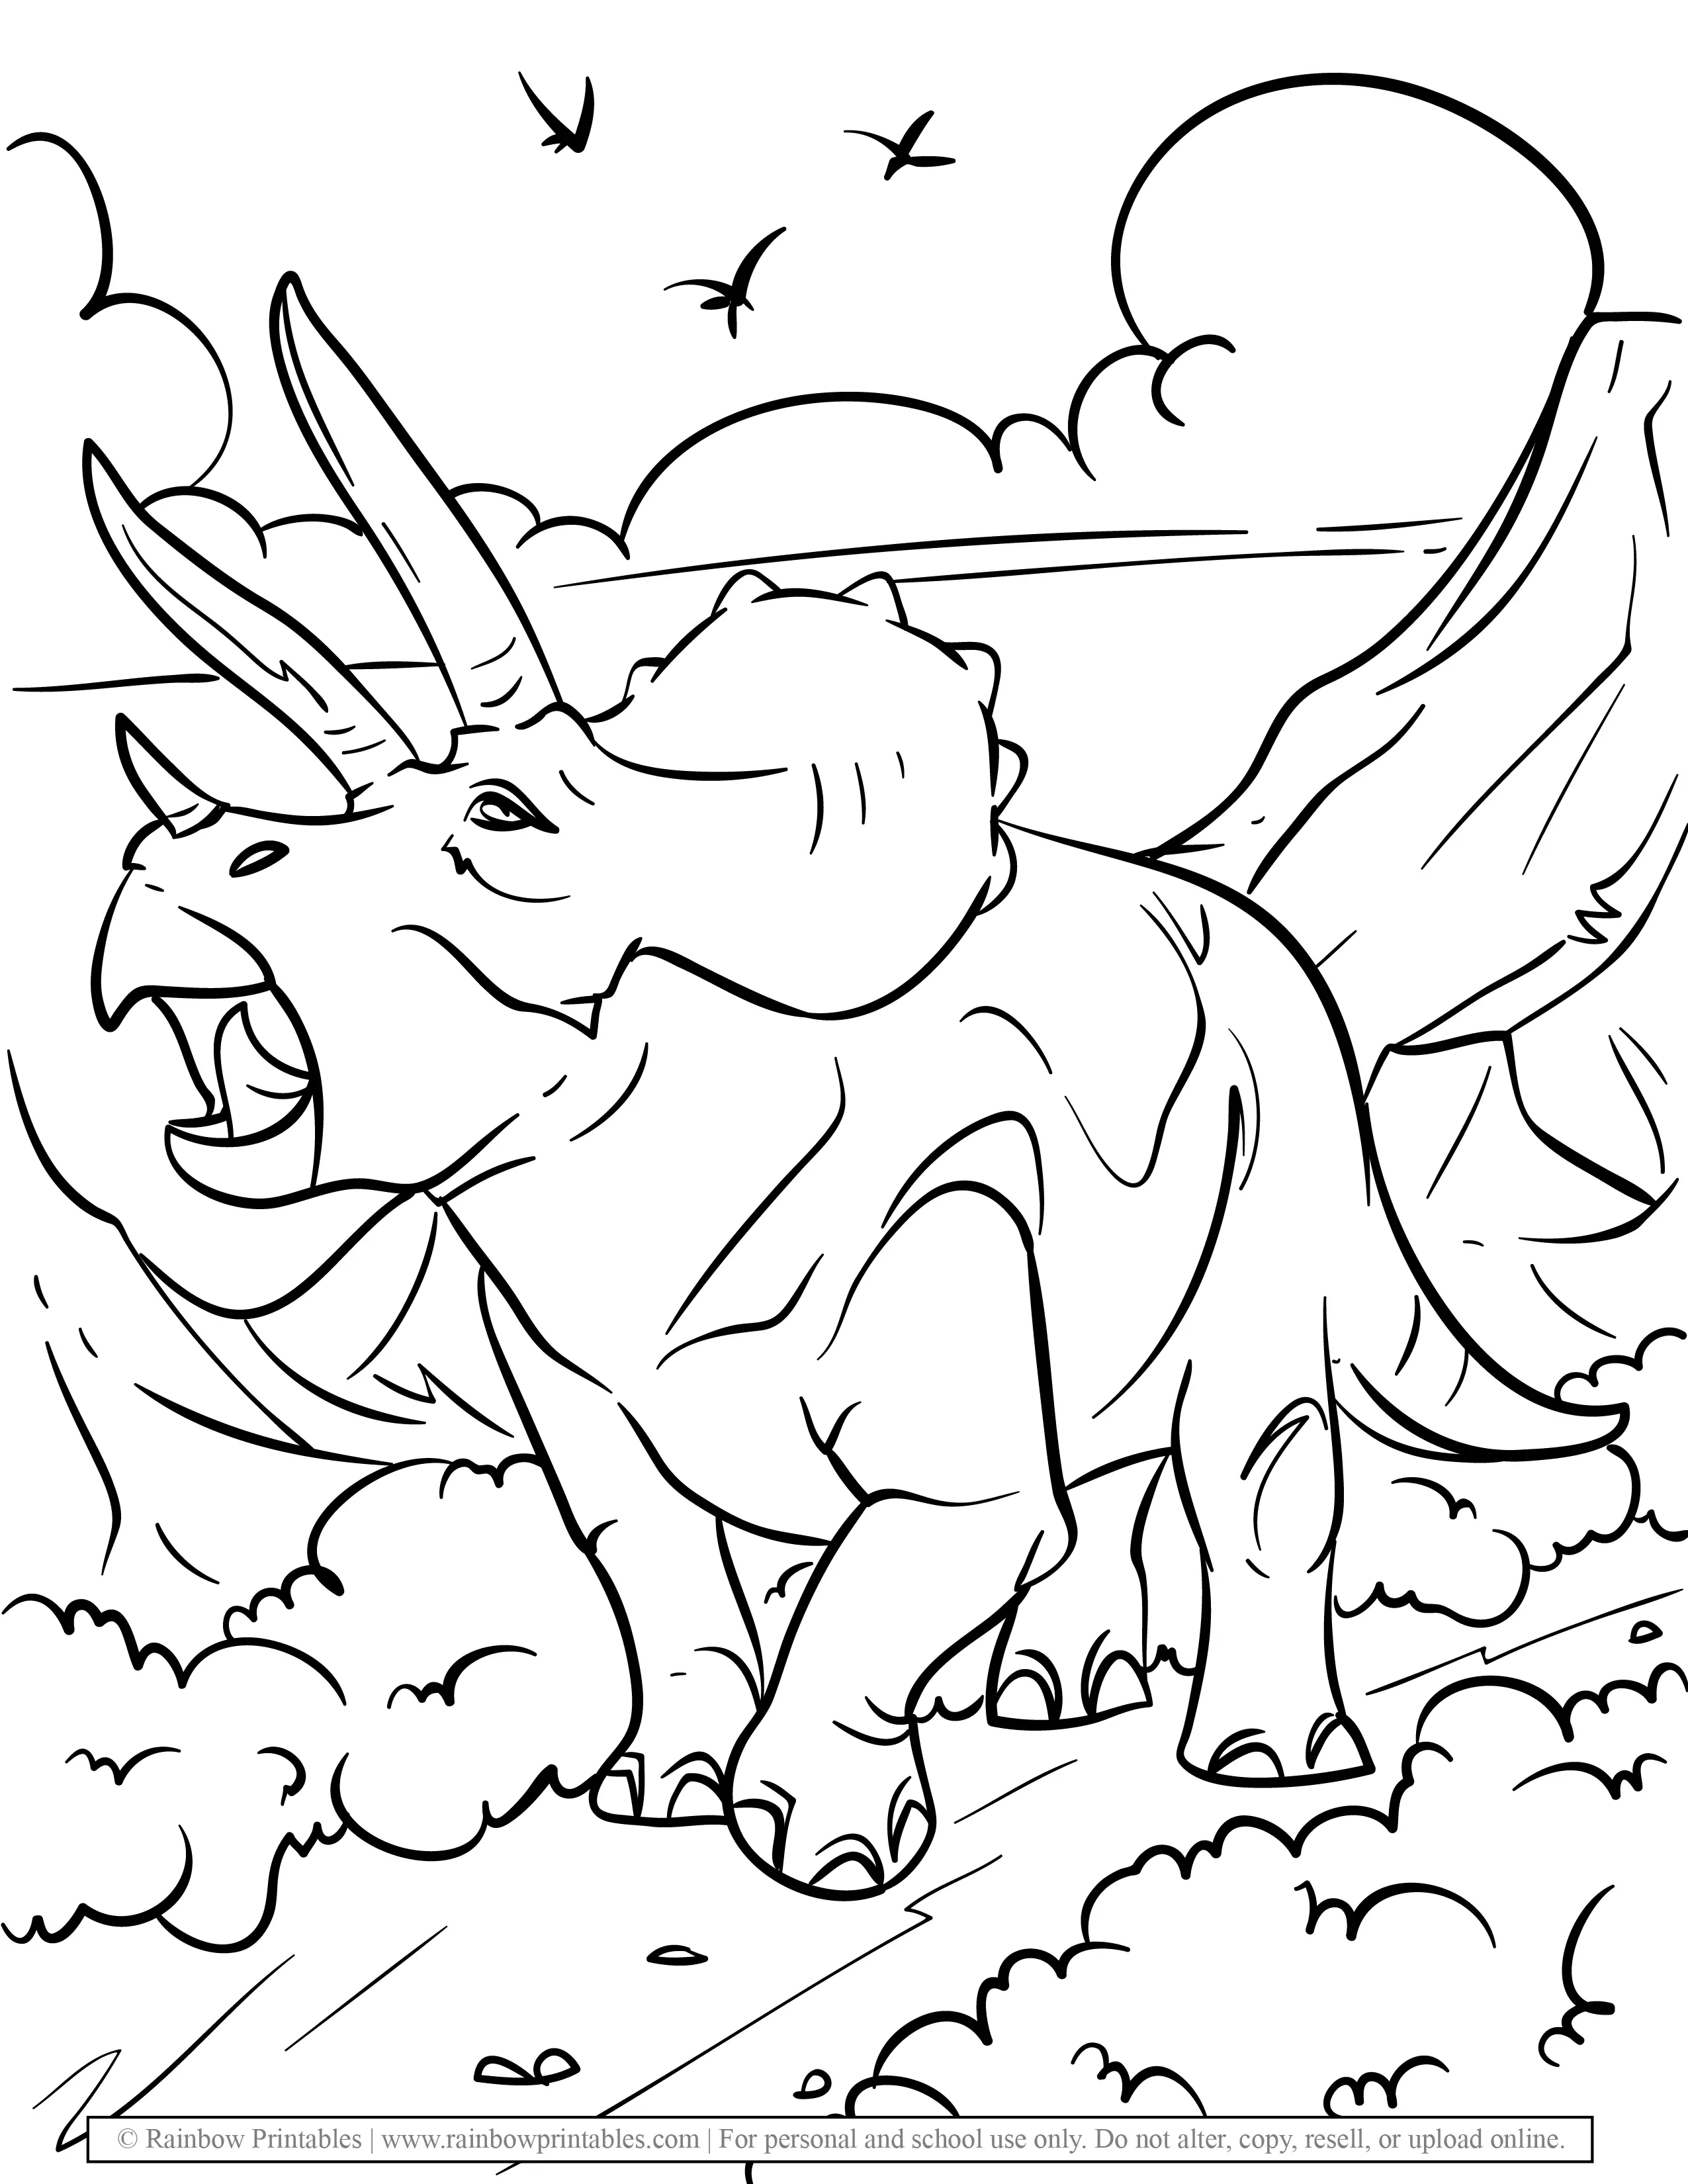 Free Dino Coloring Pages   Rainbow Printables